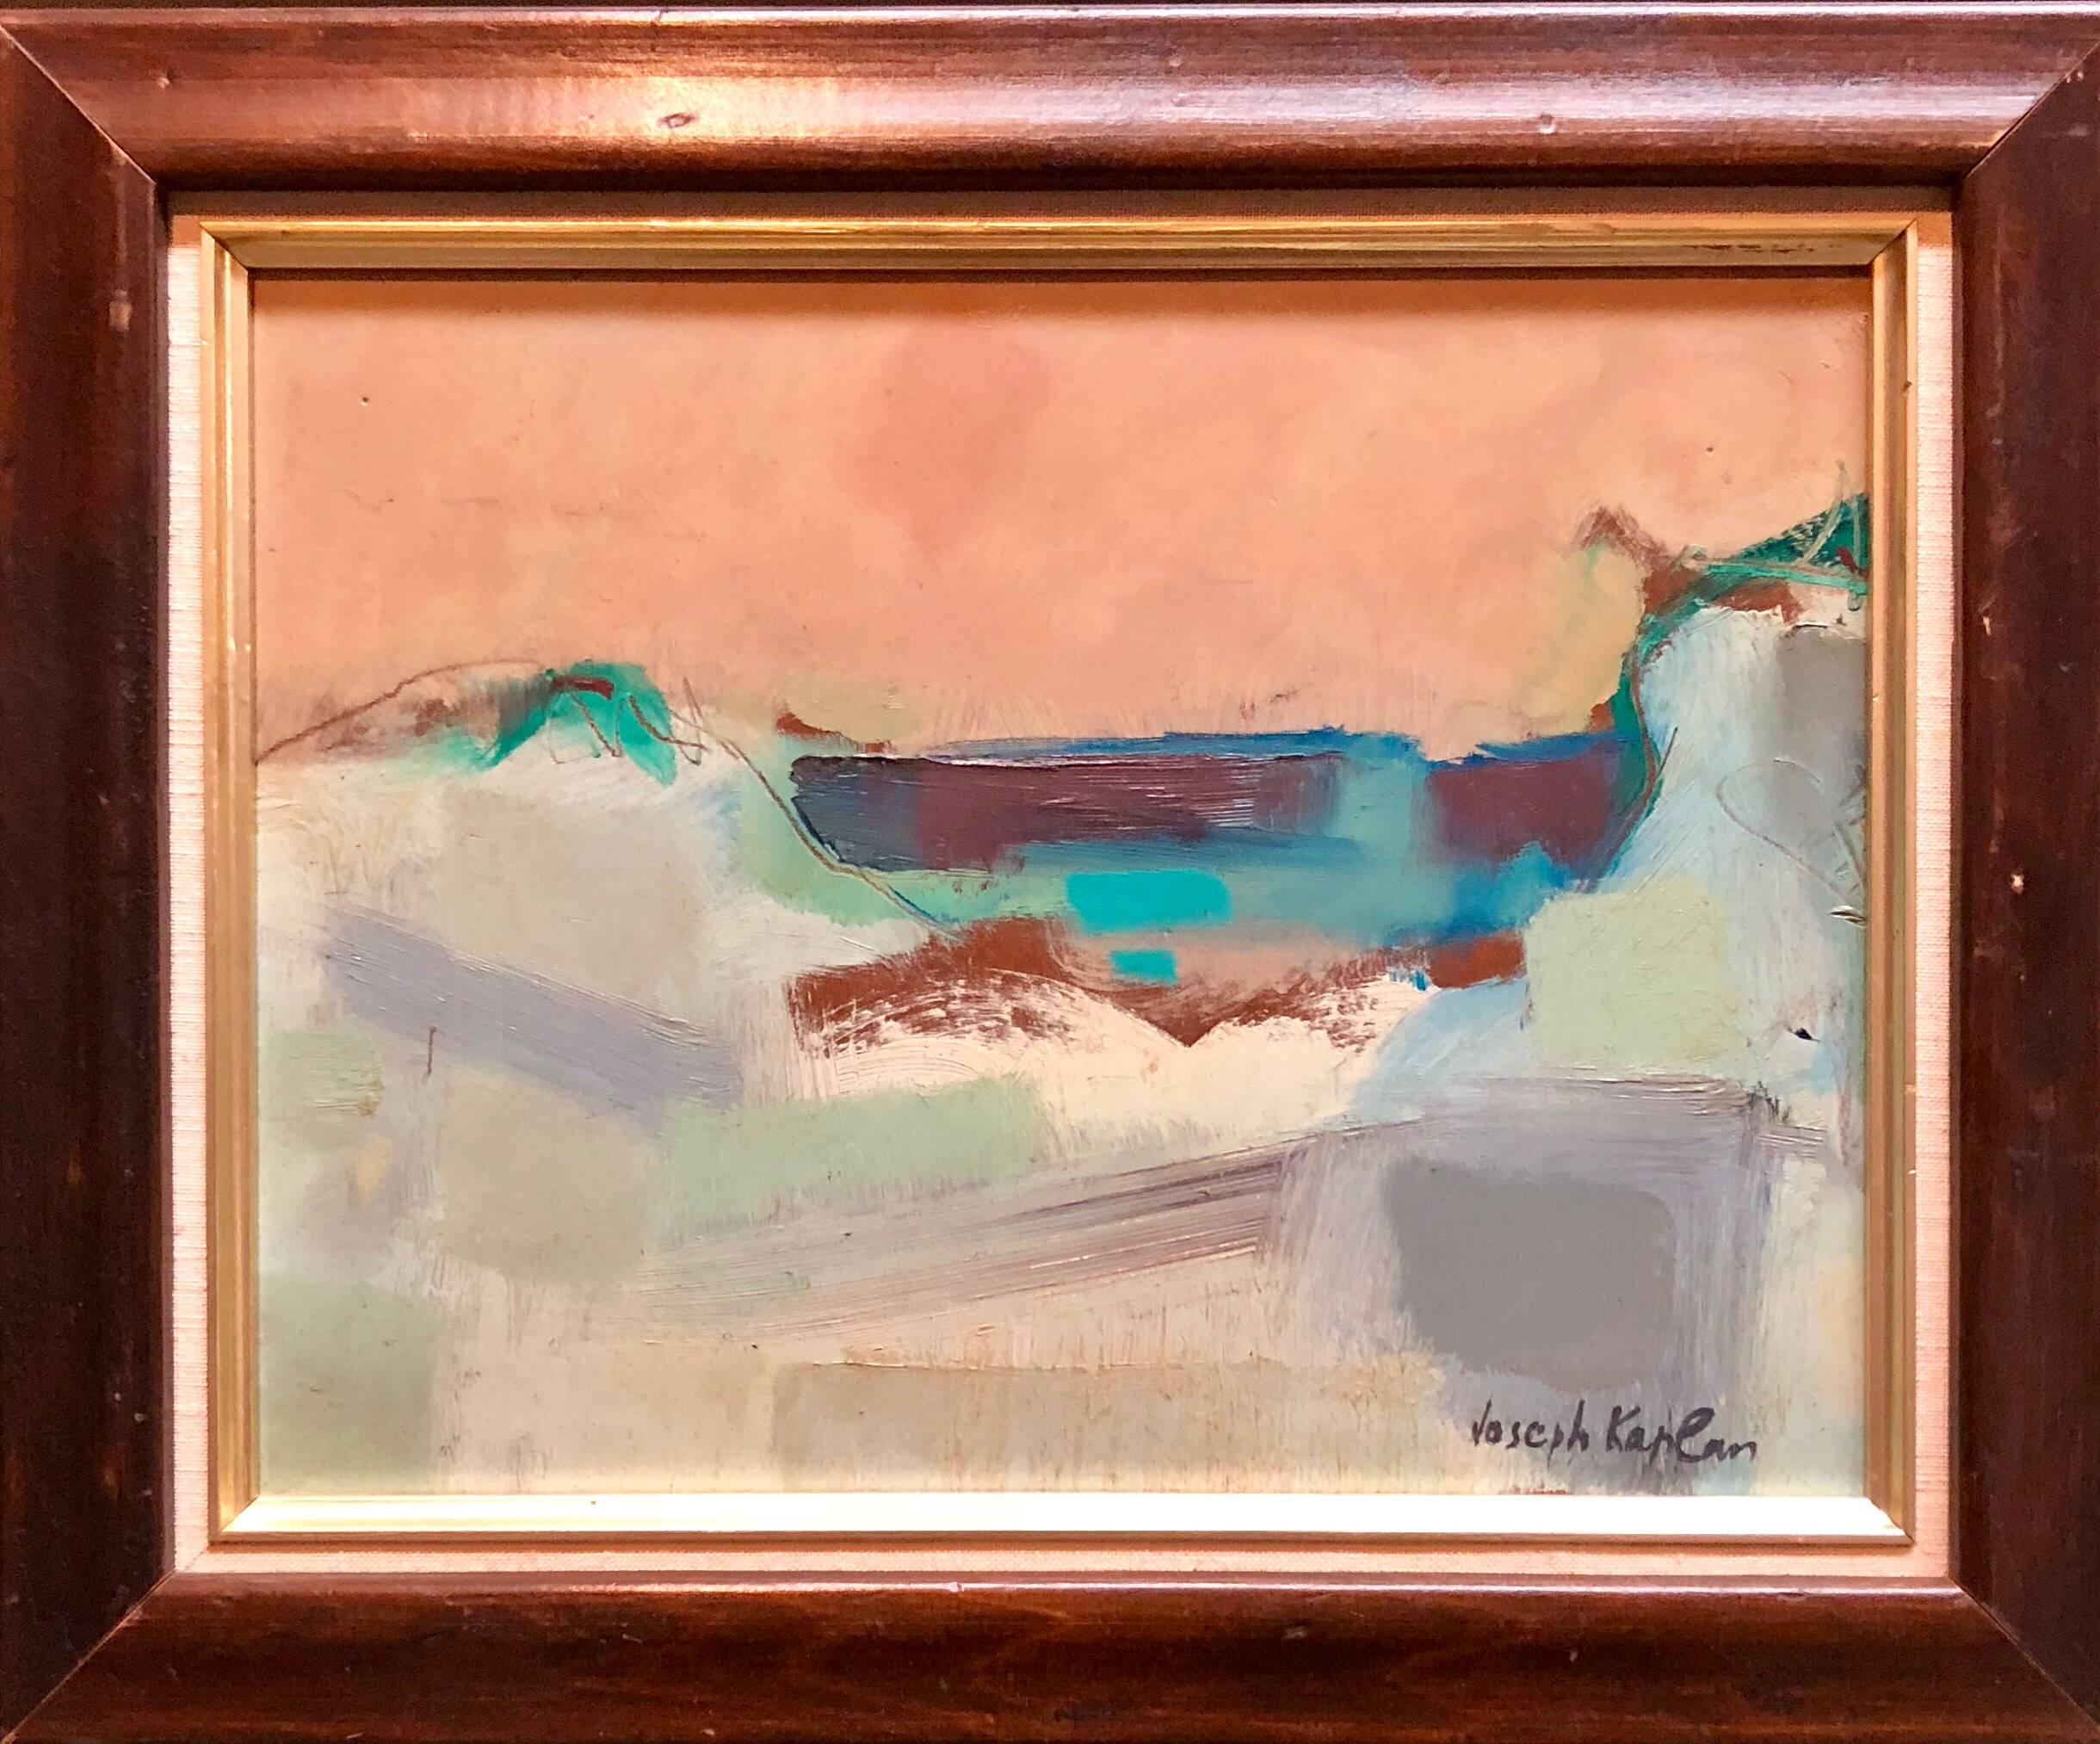 Joseph Kaplan Abstract Painting - Abstract Expressionist Provincetown Seascape Oil Painting